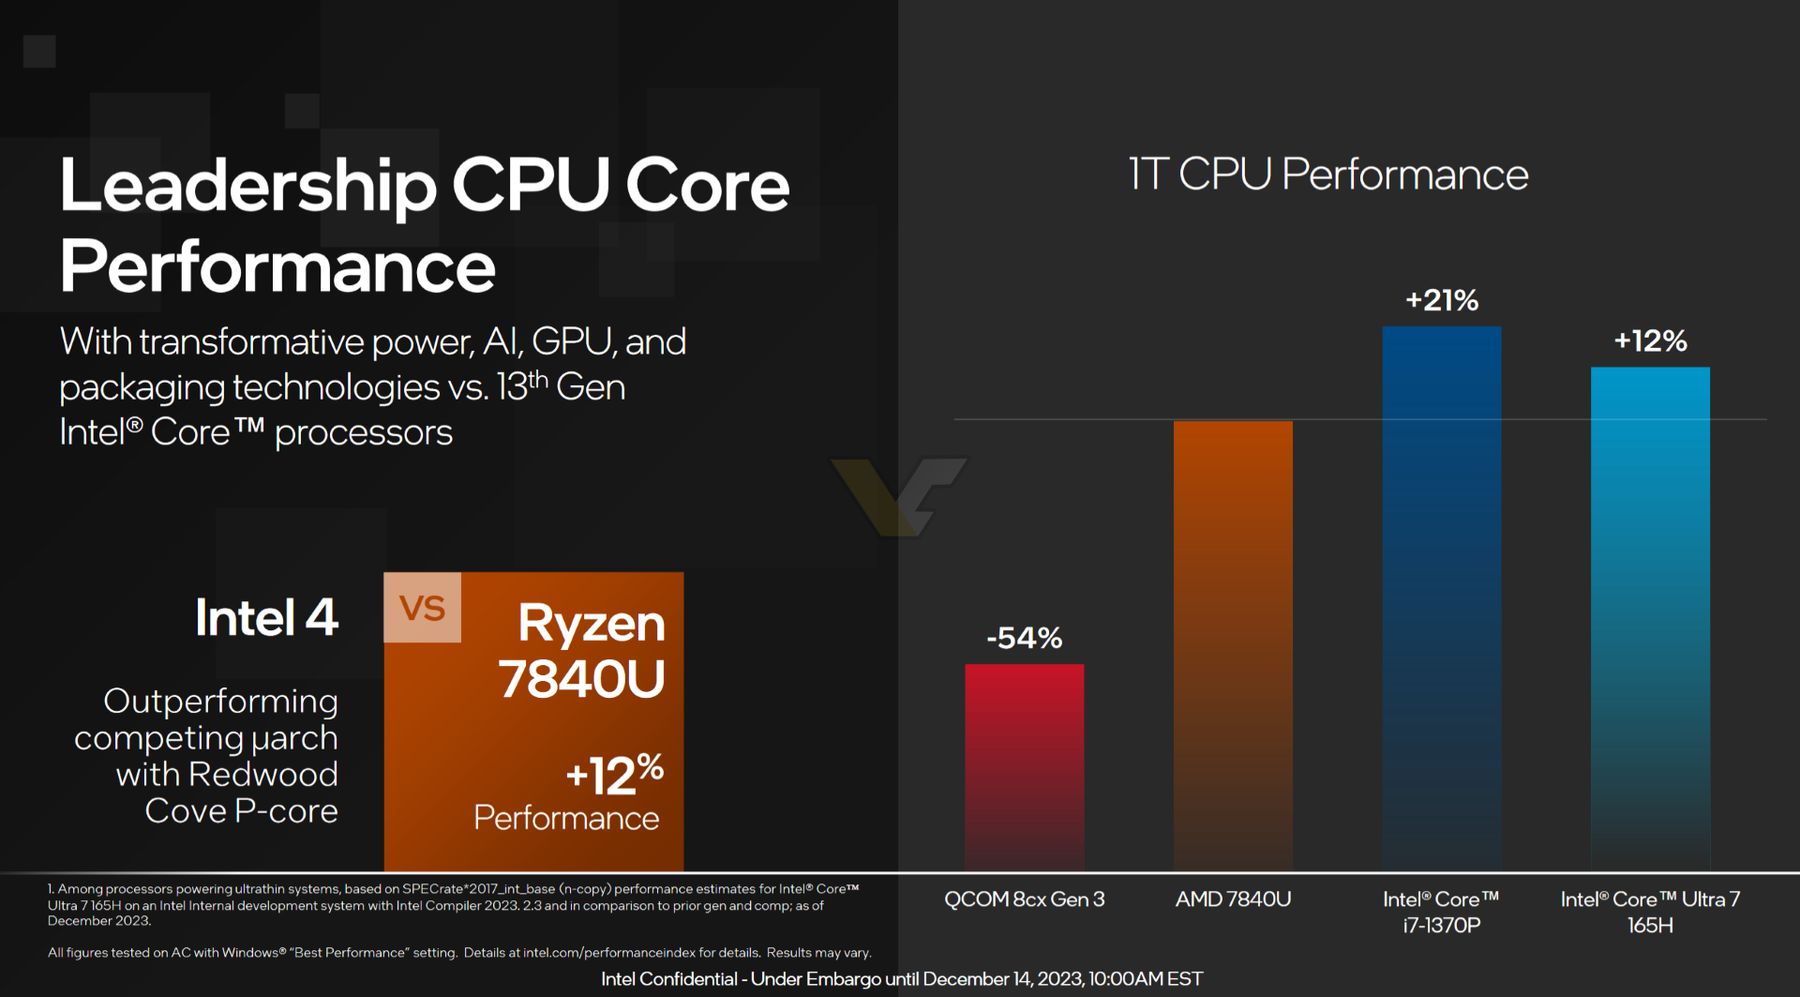 AMD vs. Intel: Top Differences To Know About Performance